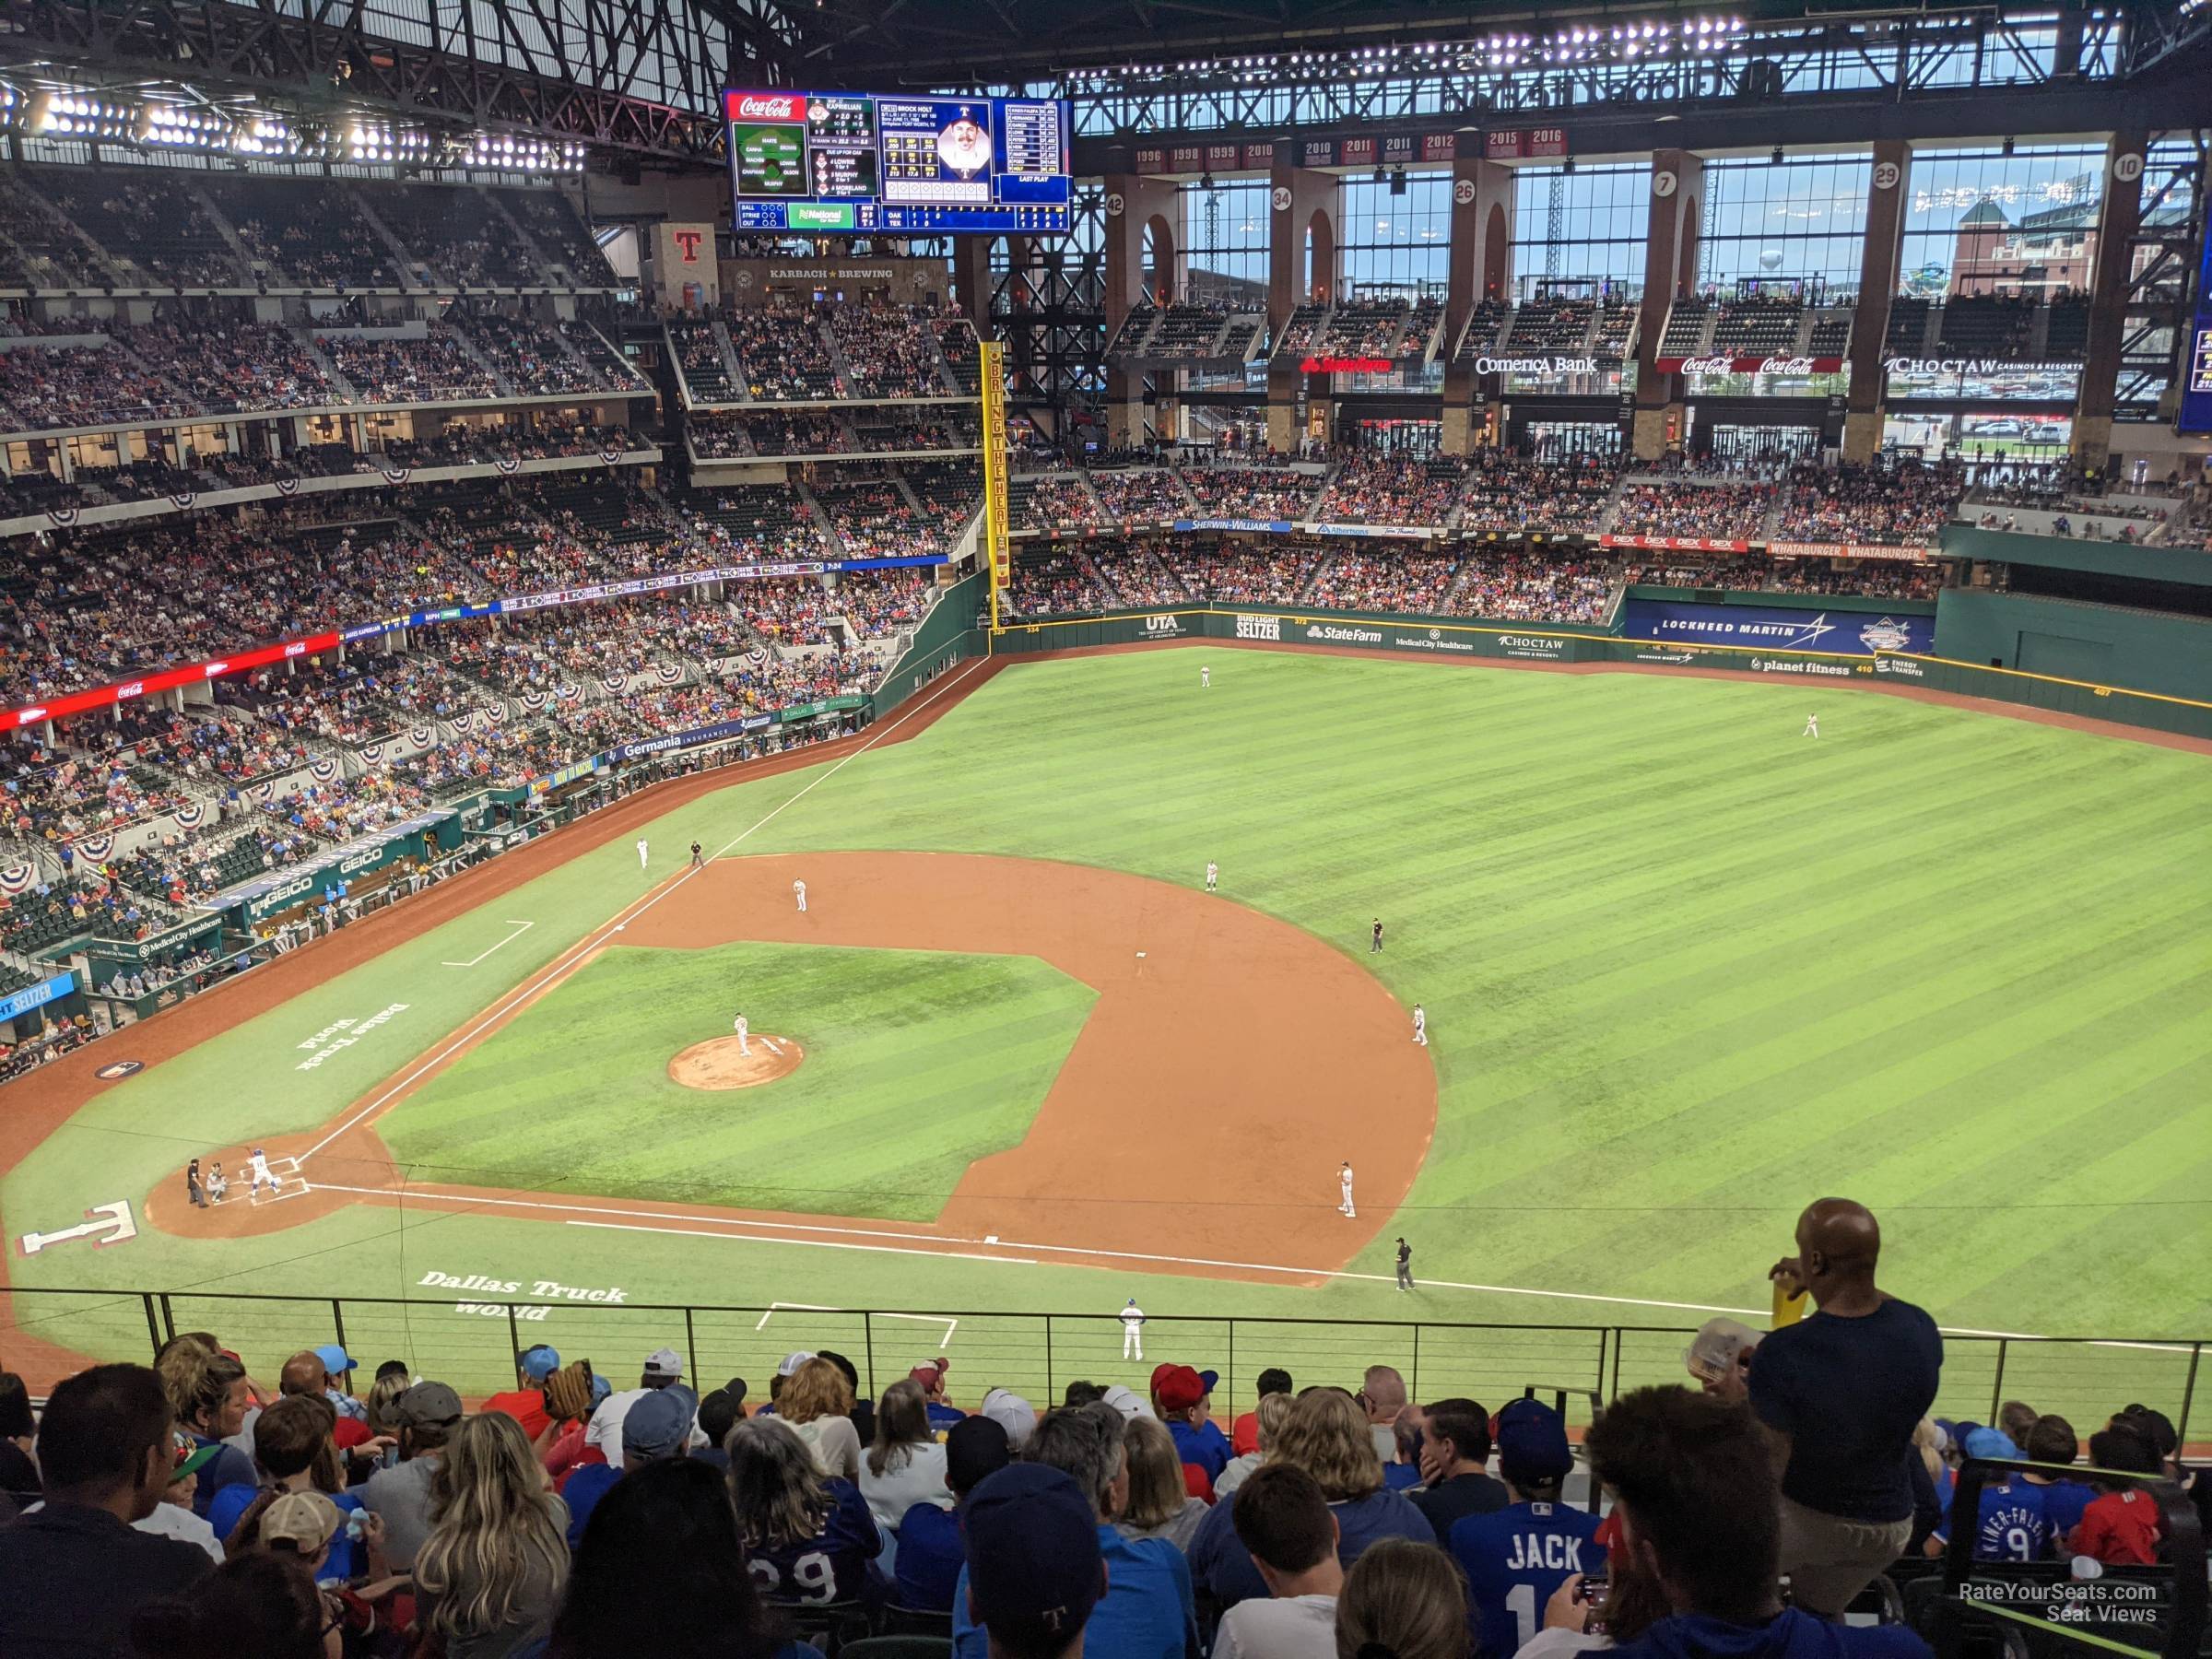 Section 224 at Globe Life Field